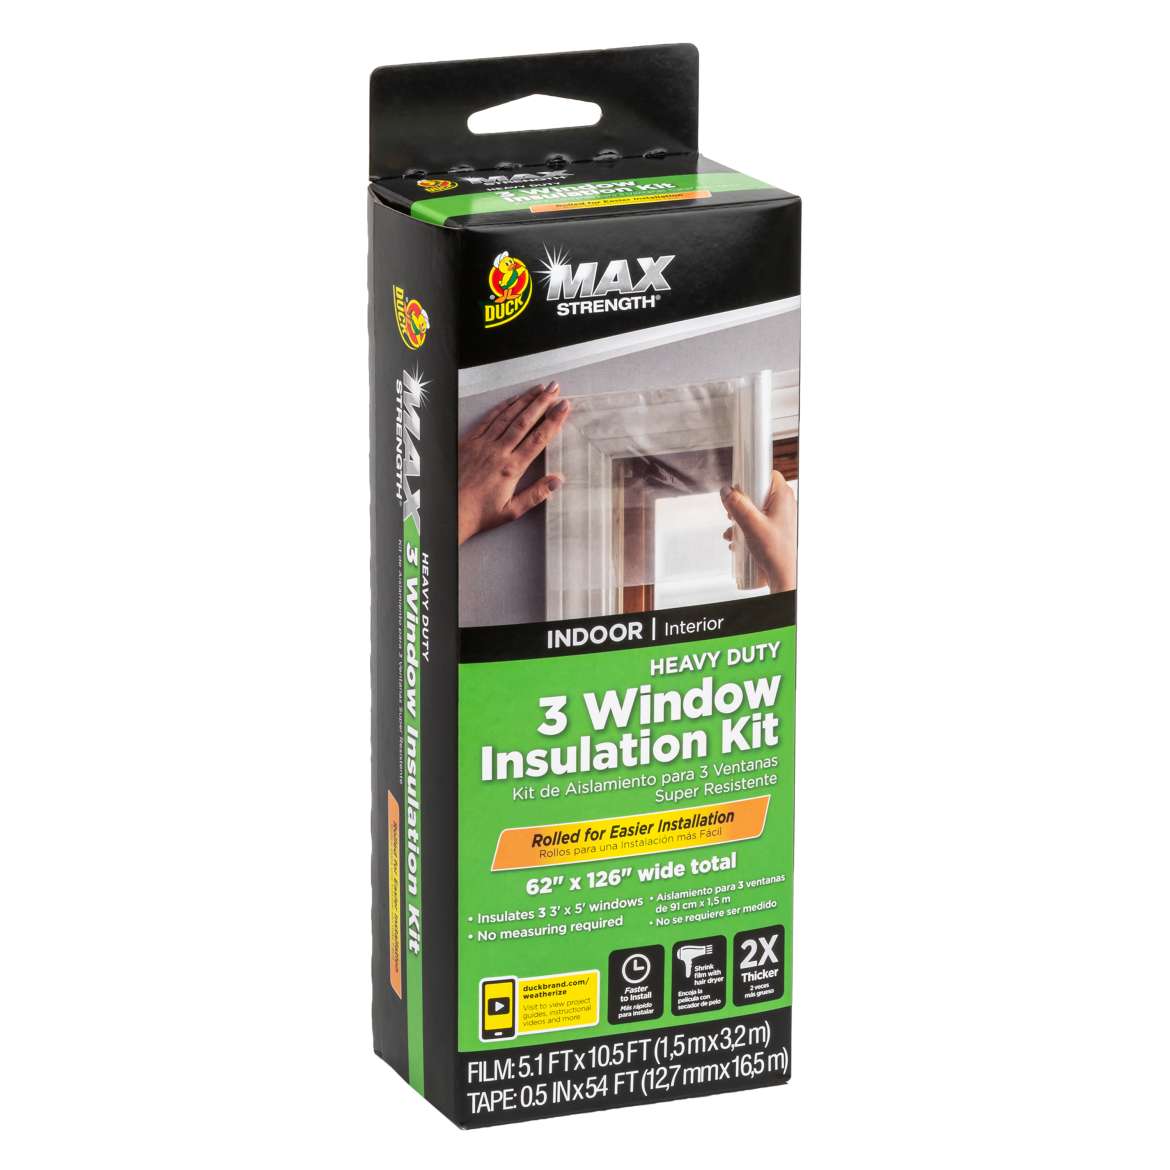 Duck Max Strength® Rolled Window Kit